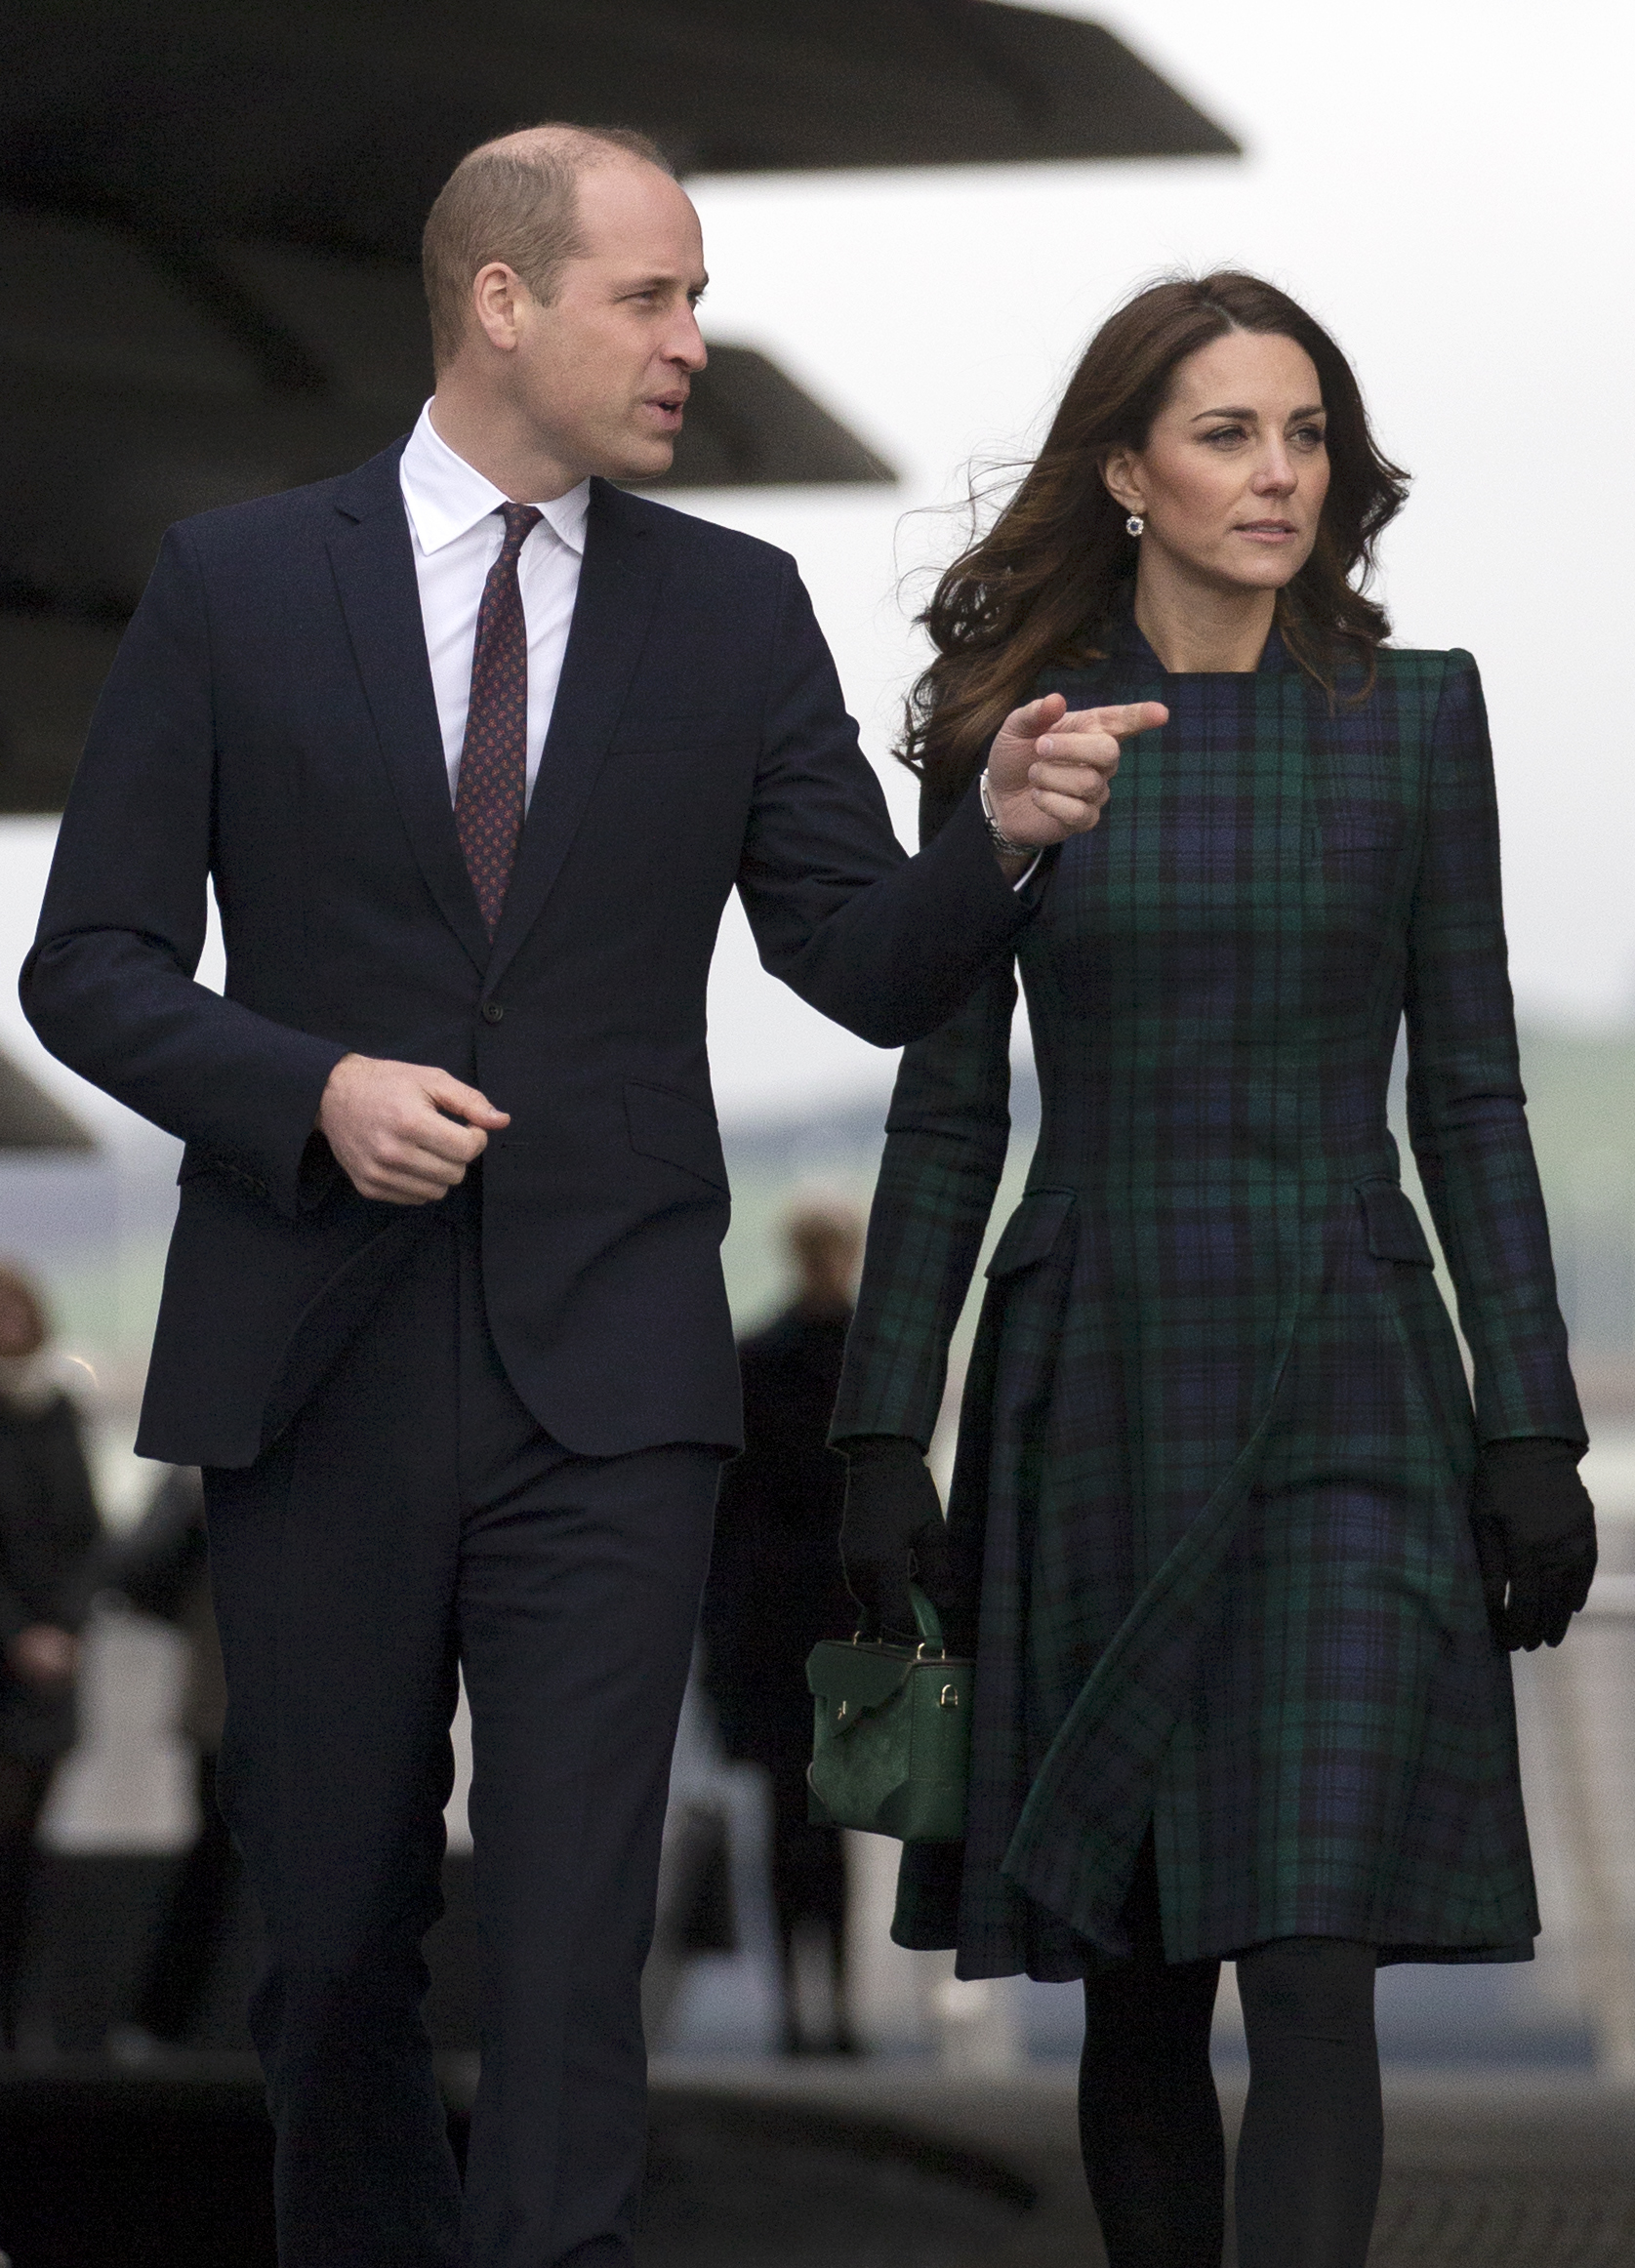 The Duke and Duchess of Cambridge, who are known as the Duke and Duchess of Strathearn, during a visit to officially open the V&A Dundee.